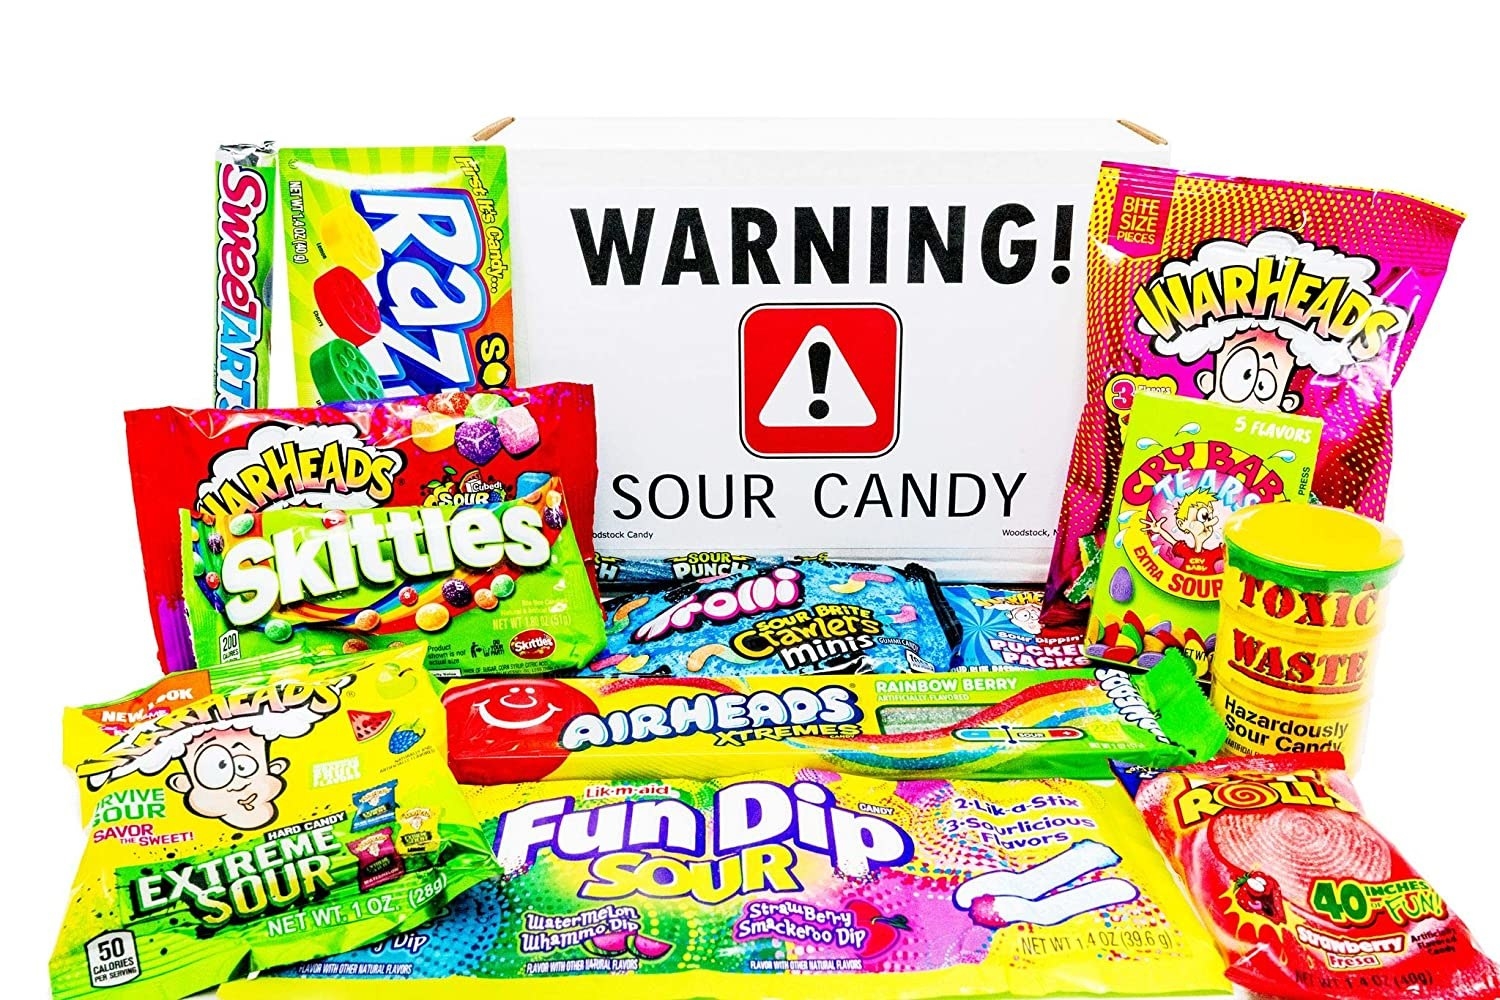 assorted sour candy like sour skittles and war heads